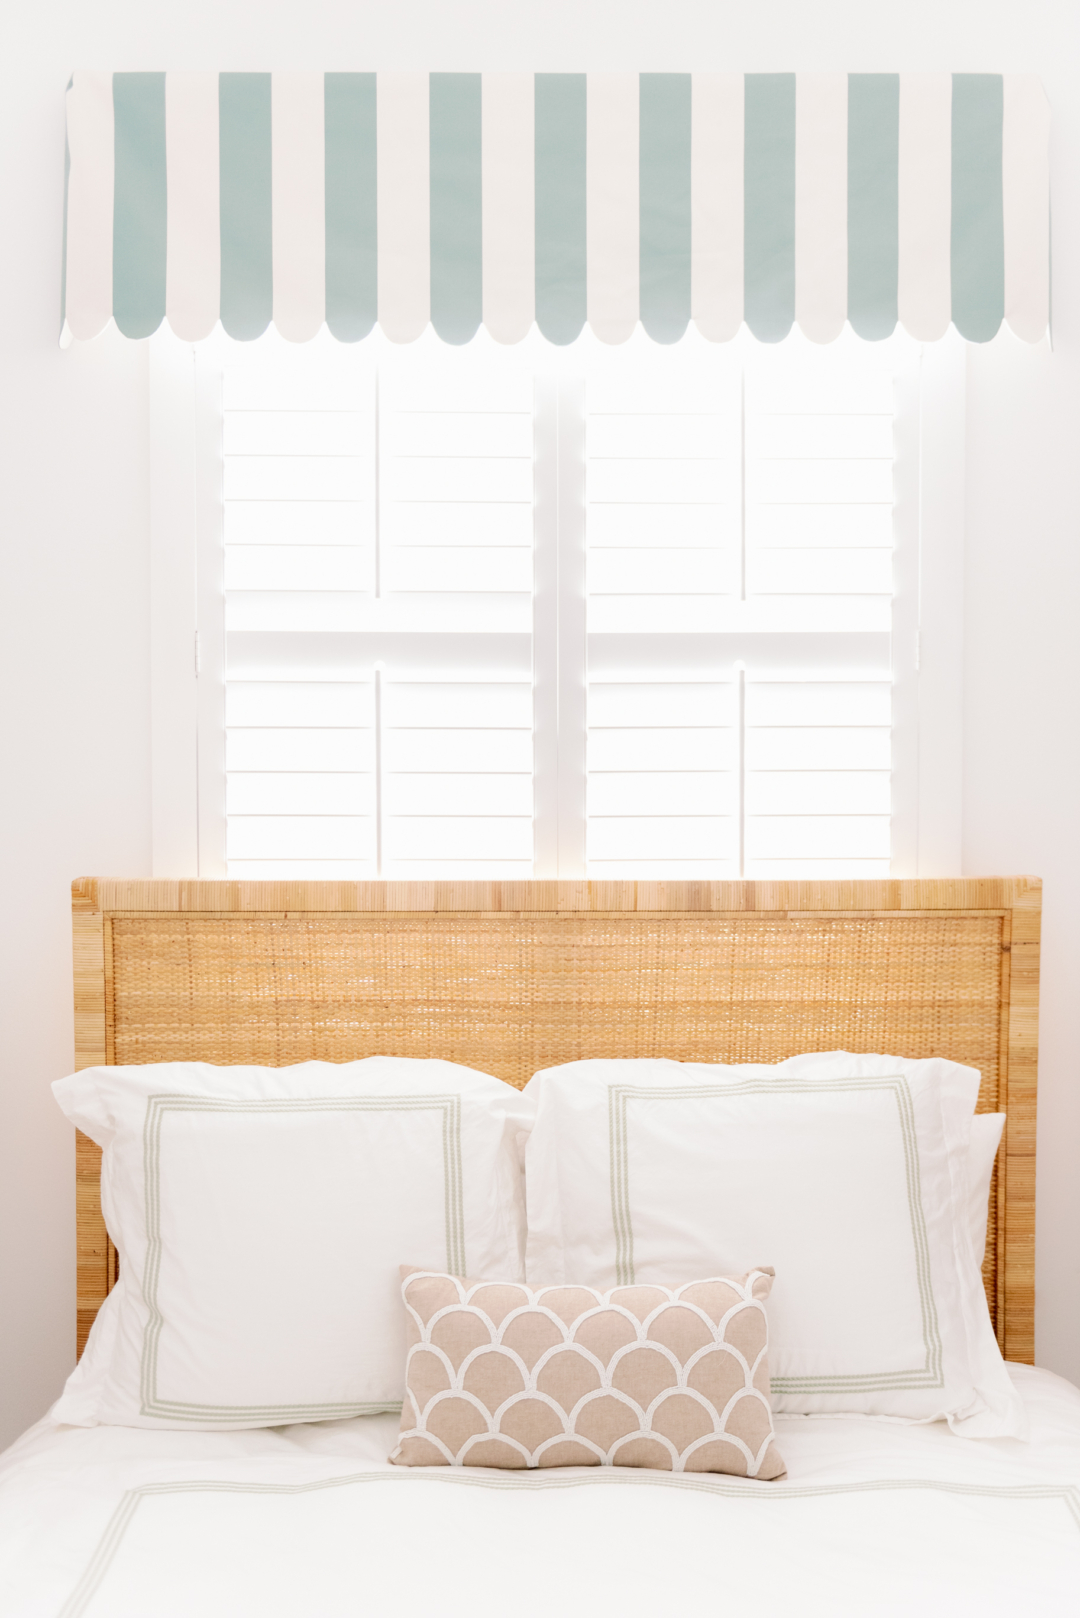 Palm Beach Lately's Mint Guest Room 